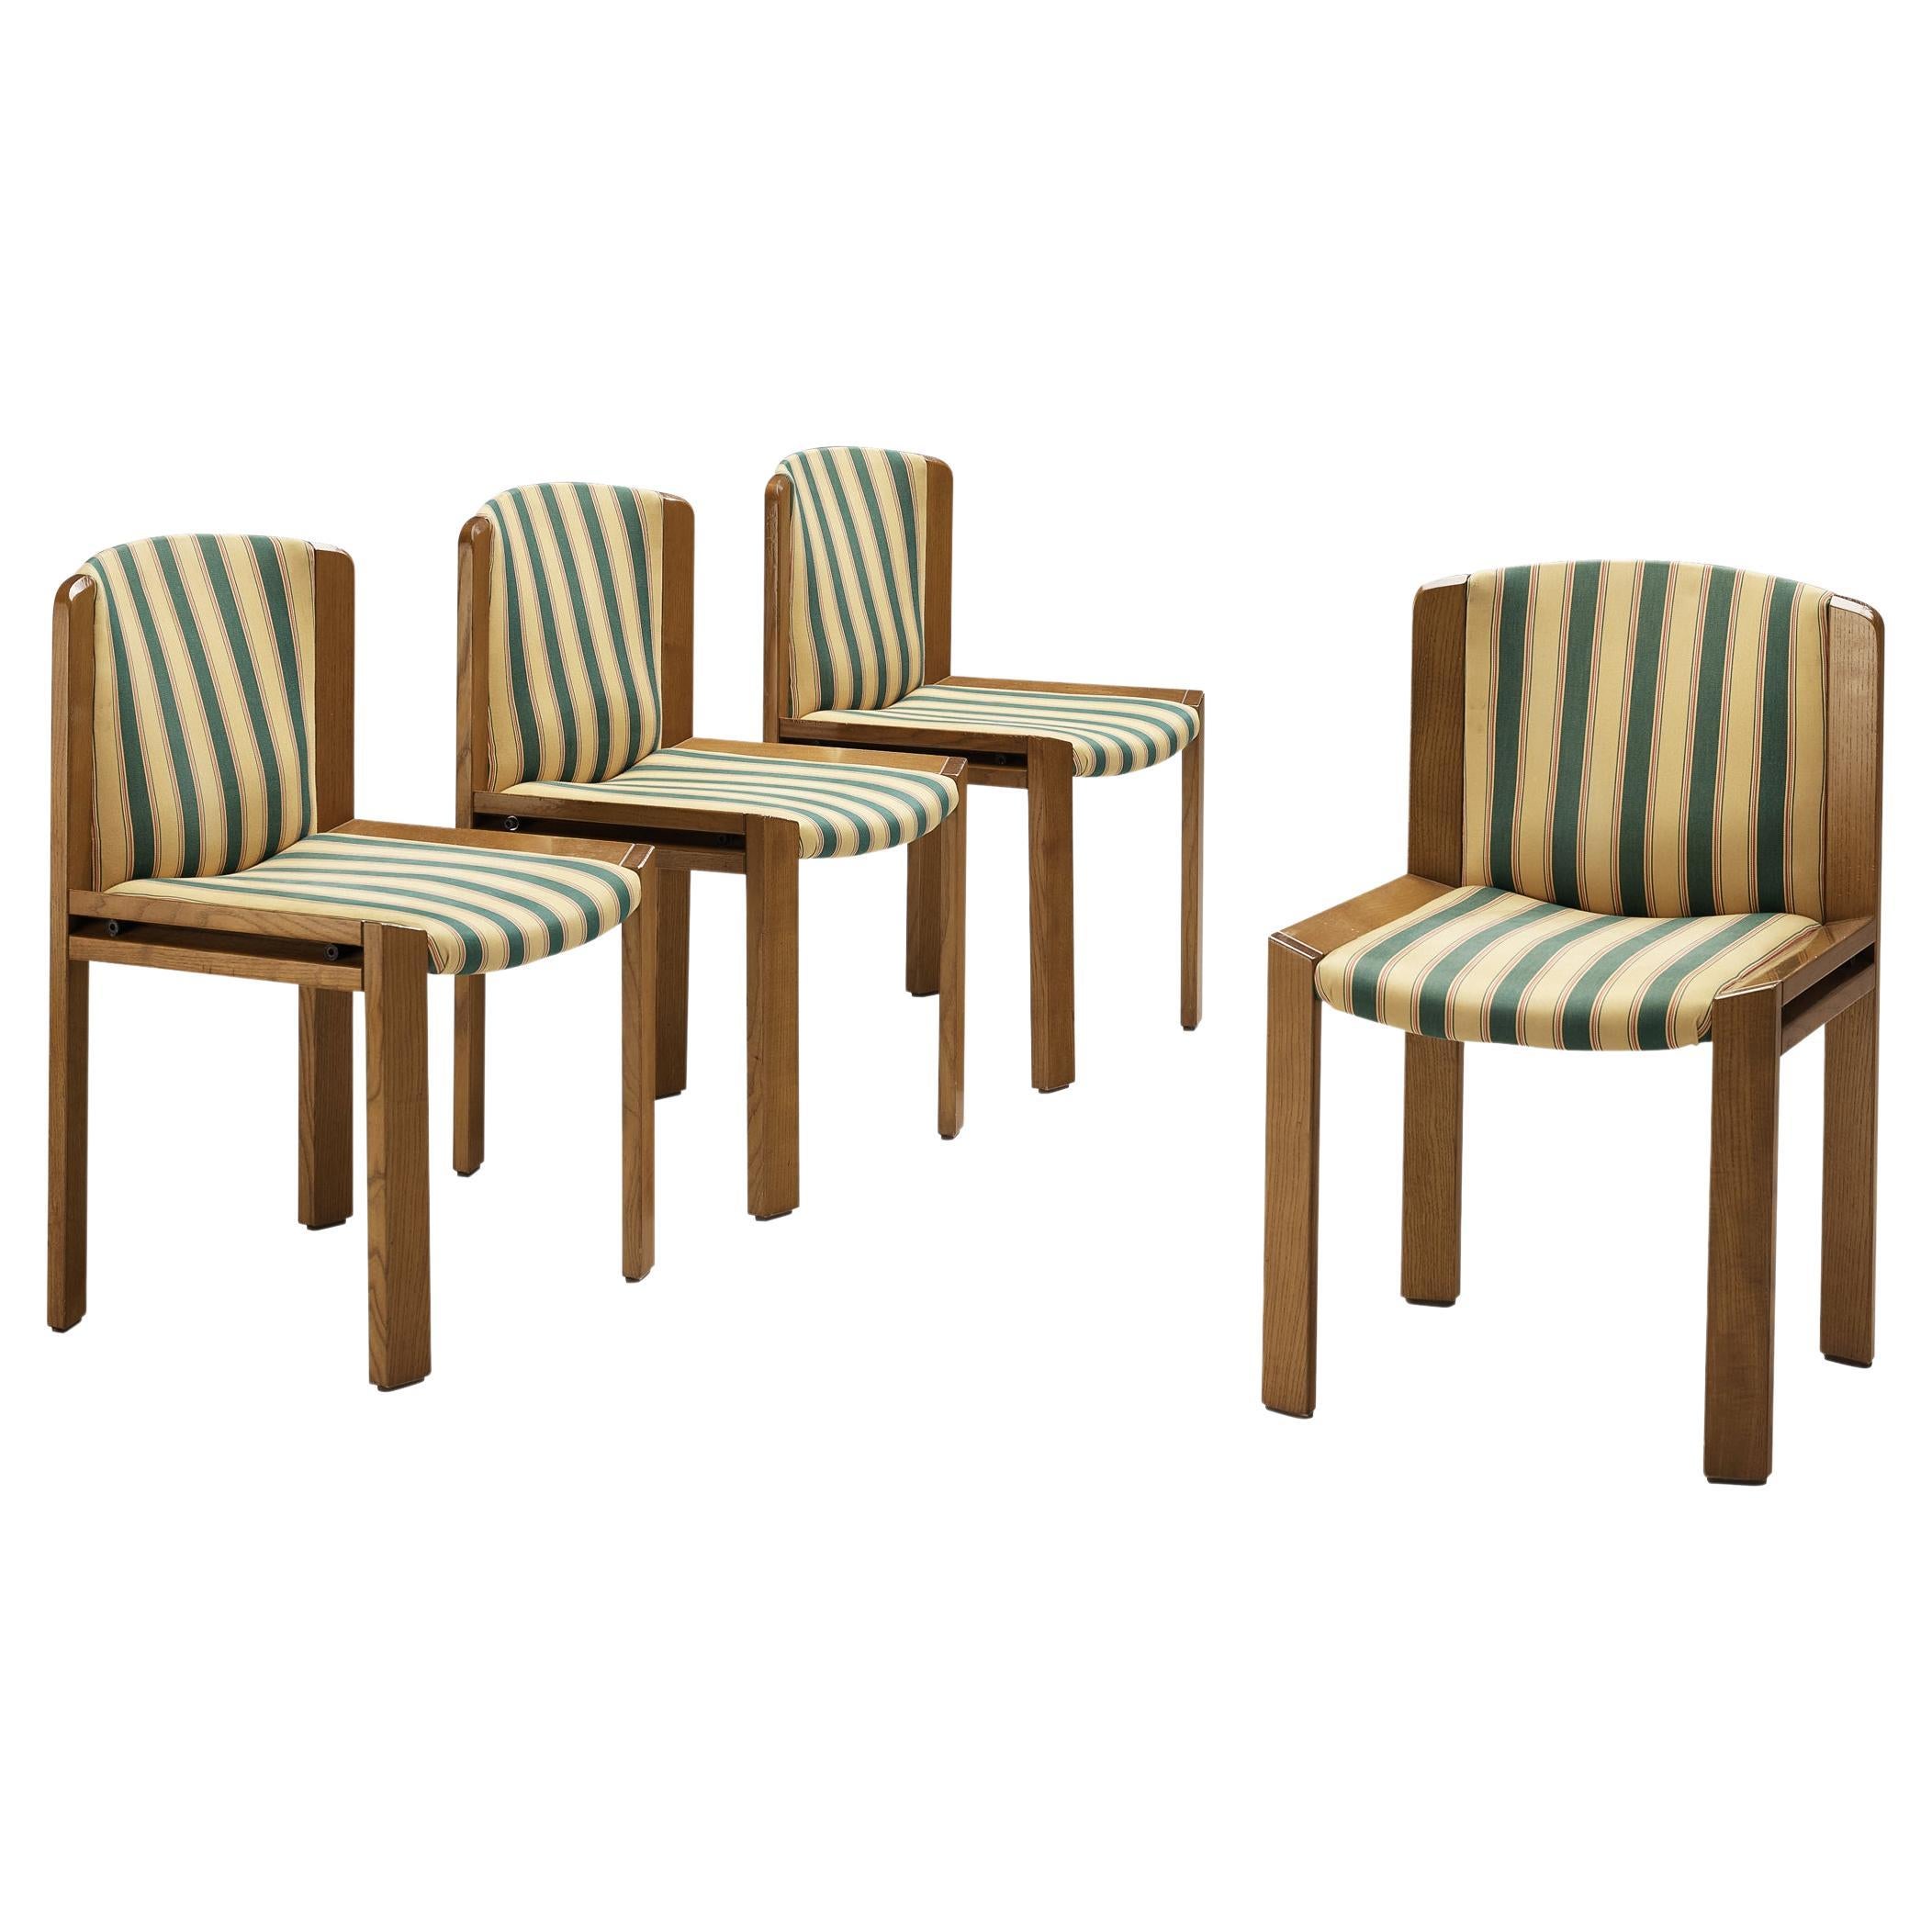 Joe Colombo for Pozzi Set of Four '300' Dining Chairs in Striped Upholstery